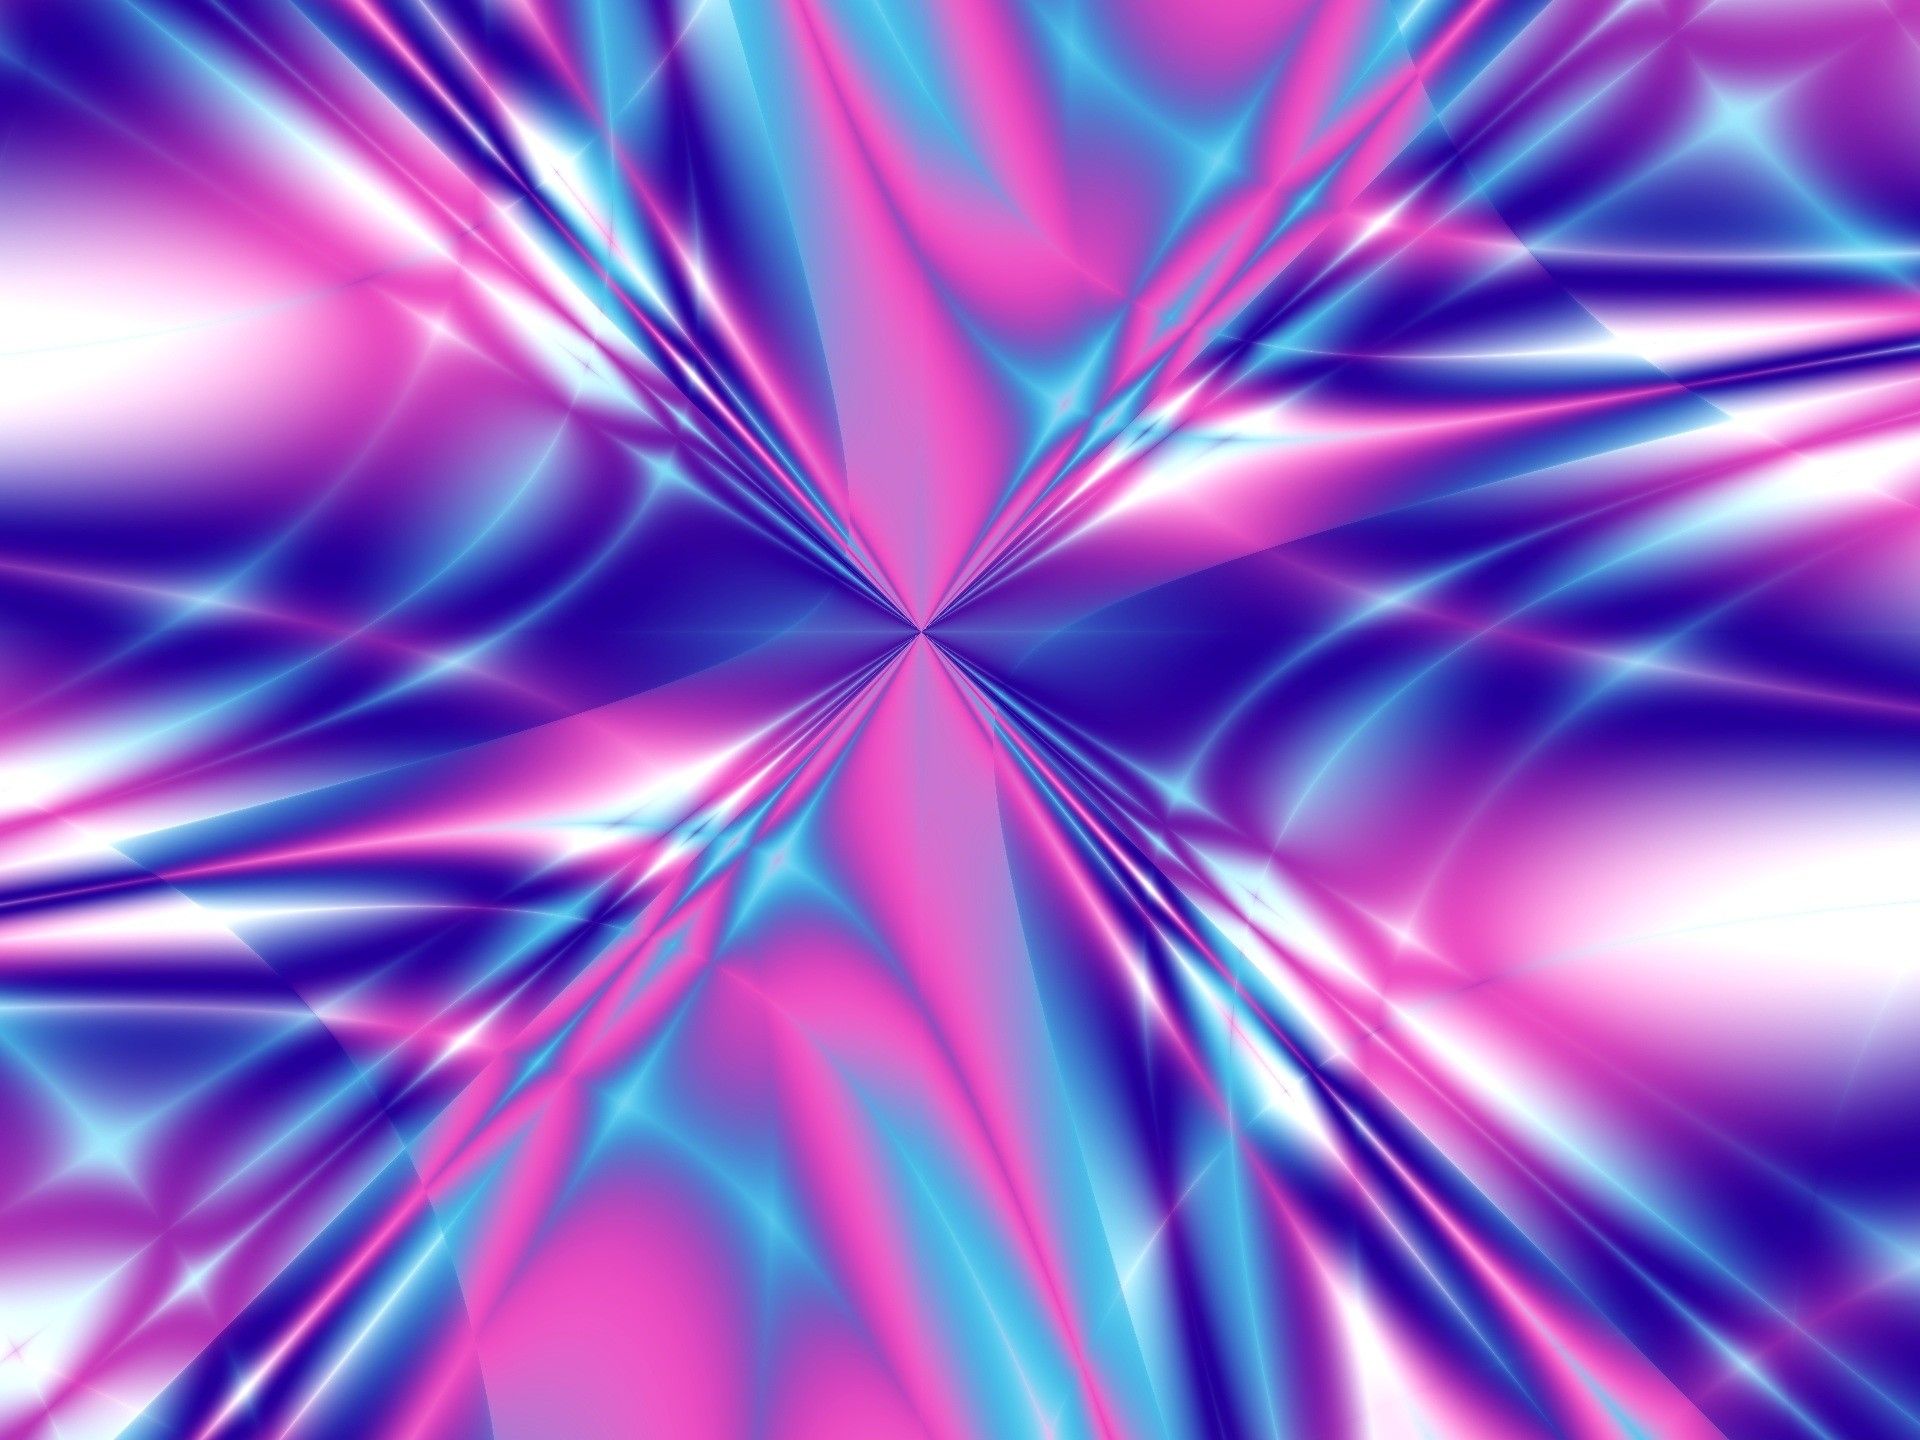 Pink and Purple Galaxy Wallpapers on WallpaperDog